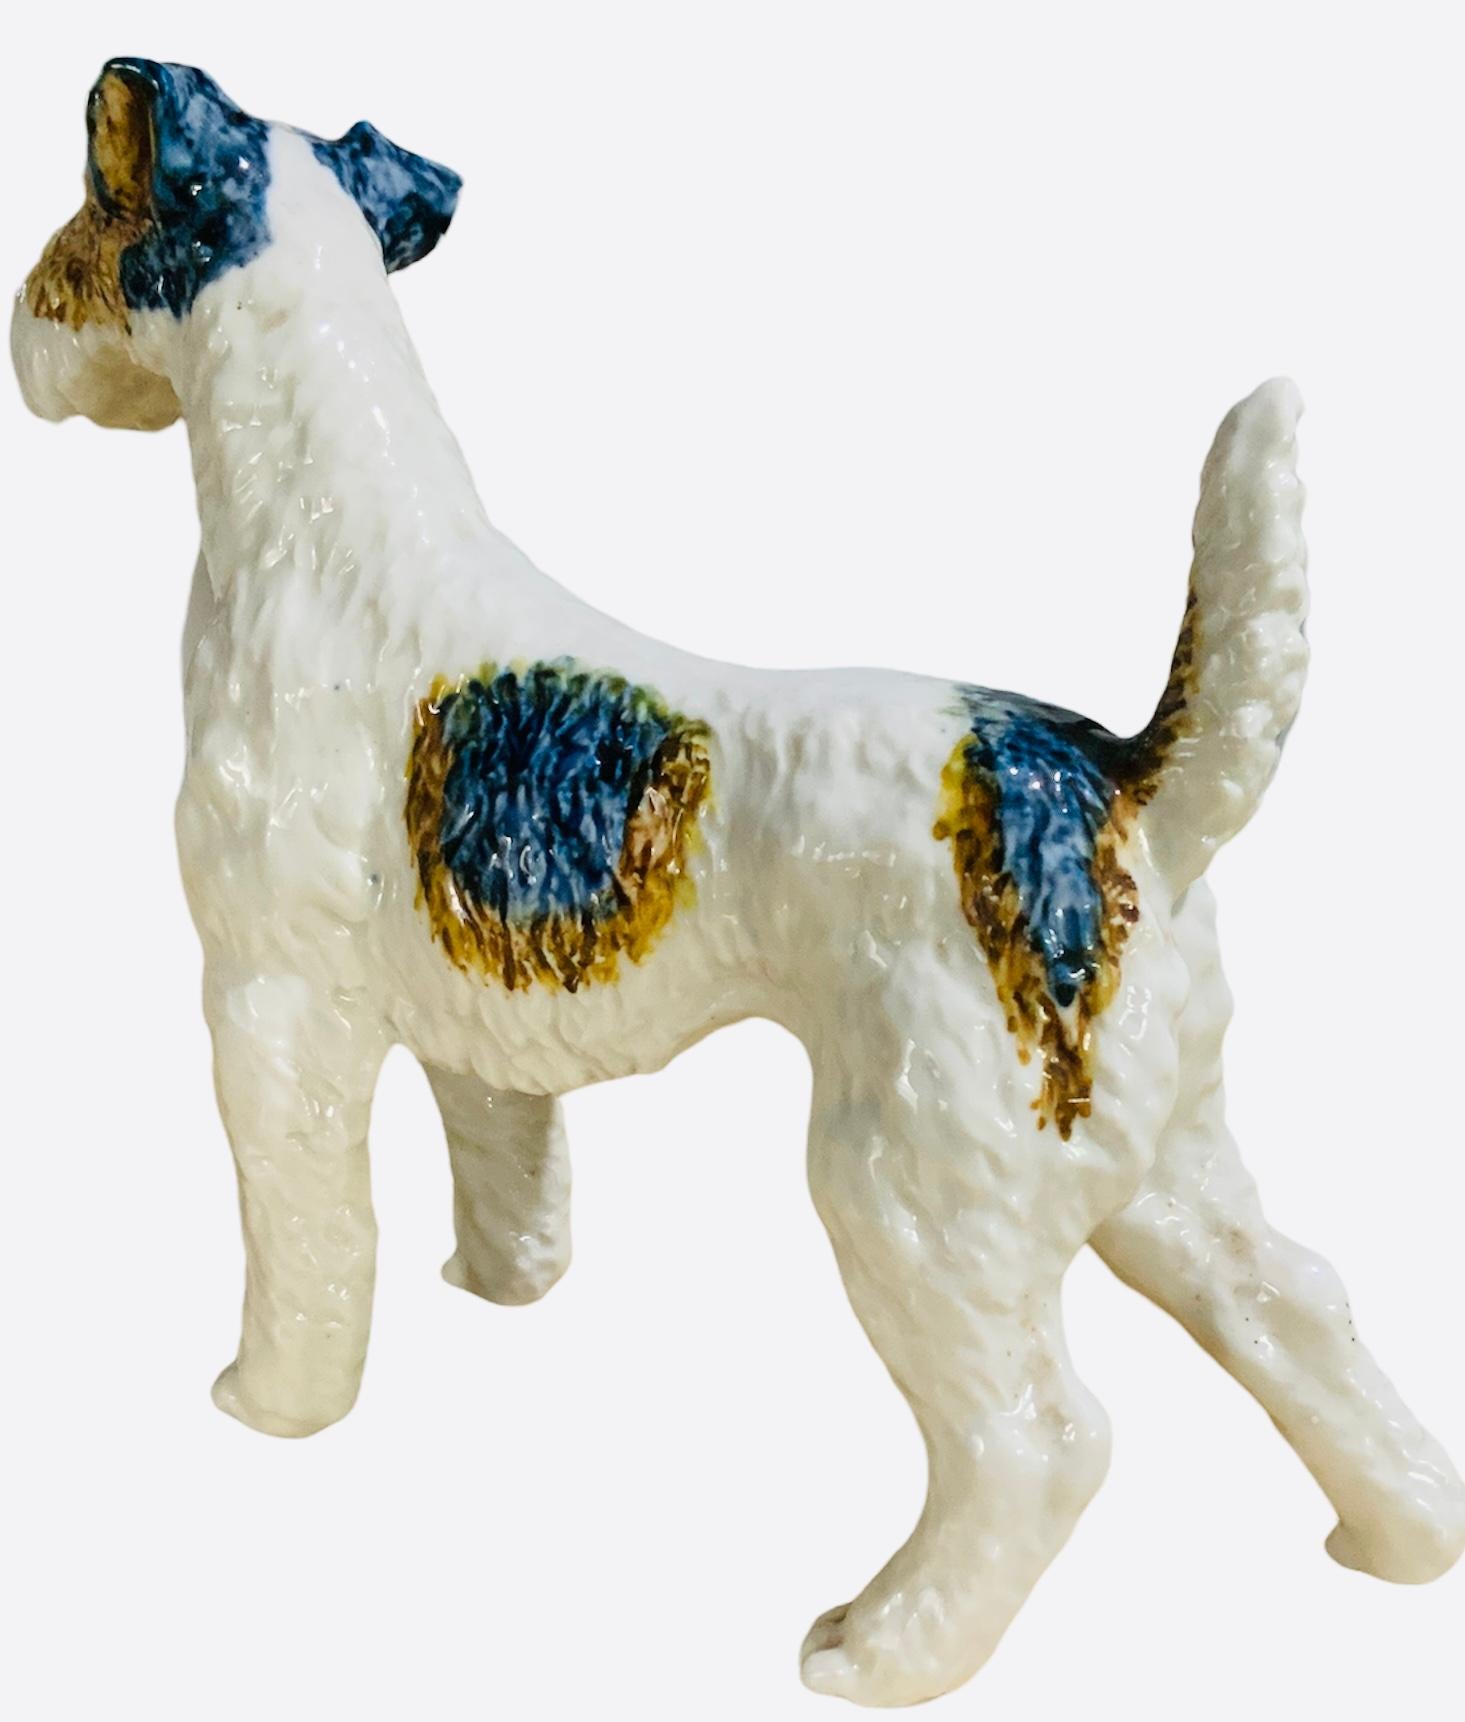 This is an adorable medium size glazed porcelain figurine of a Terrier dog. It is hand painted white and highlighted with yellow-brownish spots. Very well made. It doesn’t have any hallmark.